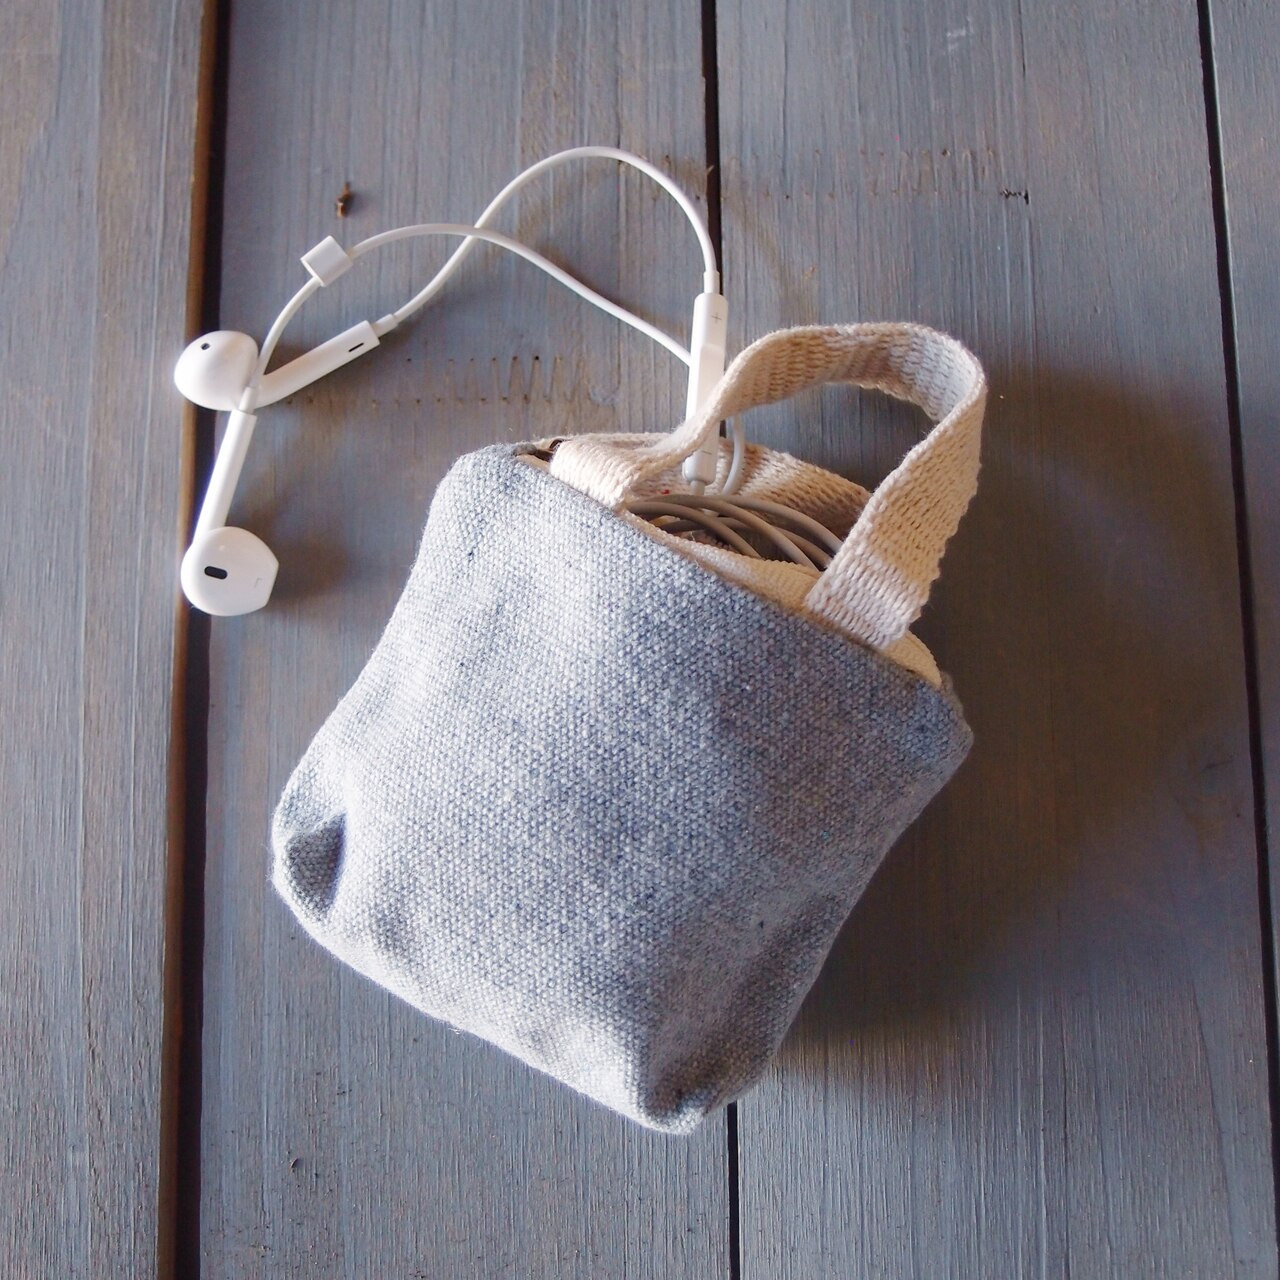 Recycled Canvas Zipper Bags, Wholesale Zipper Bags | Packaging Decor